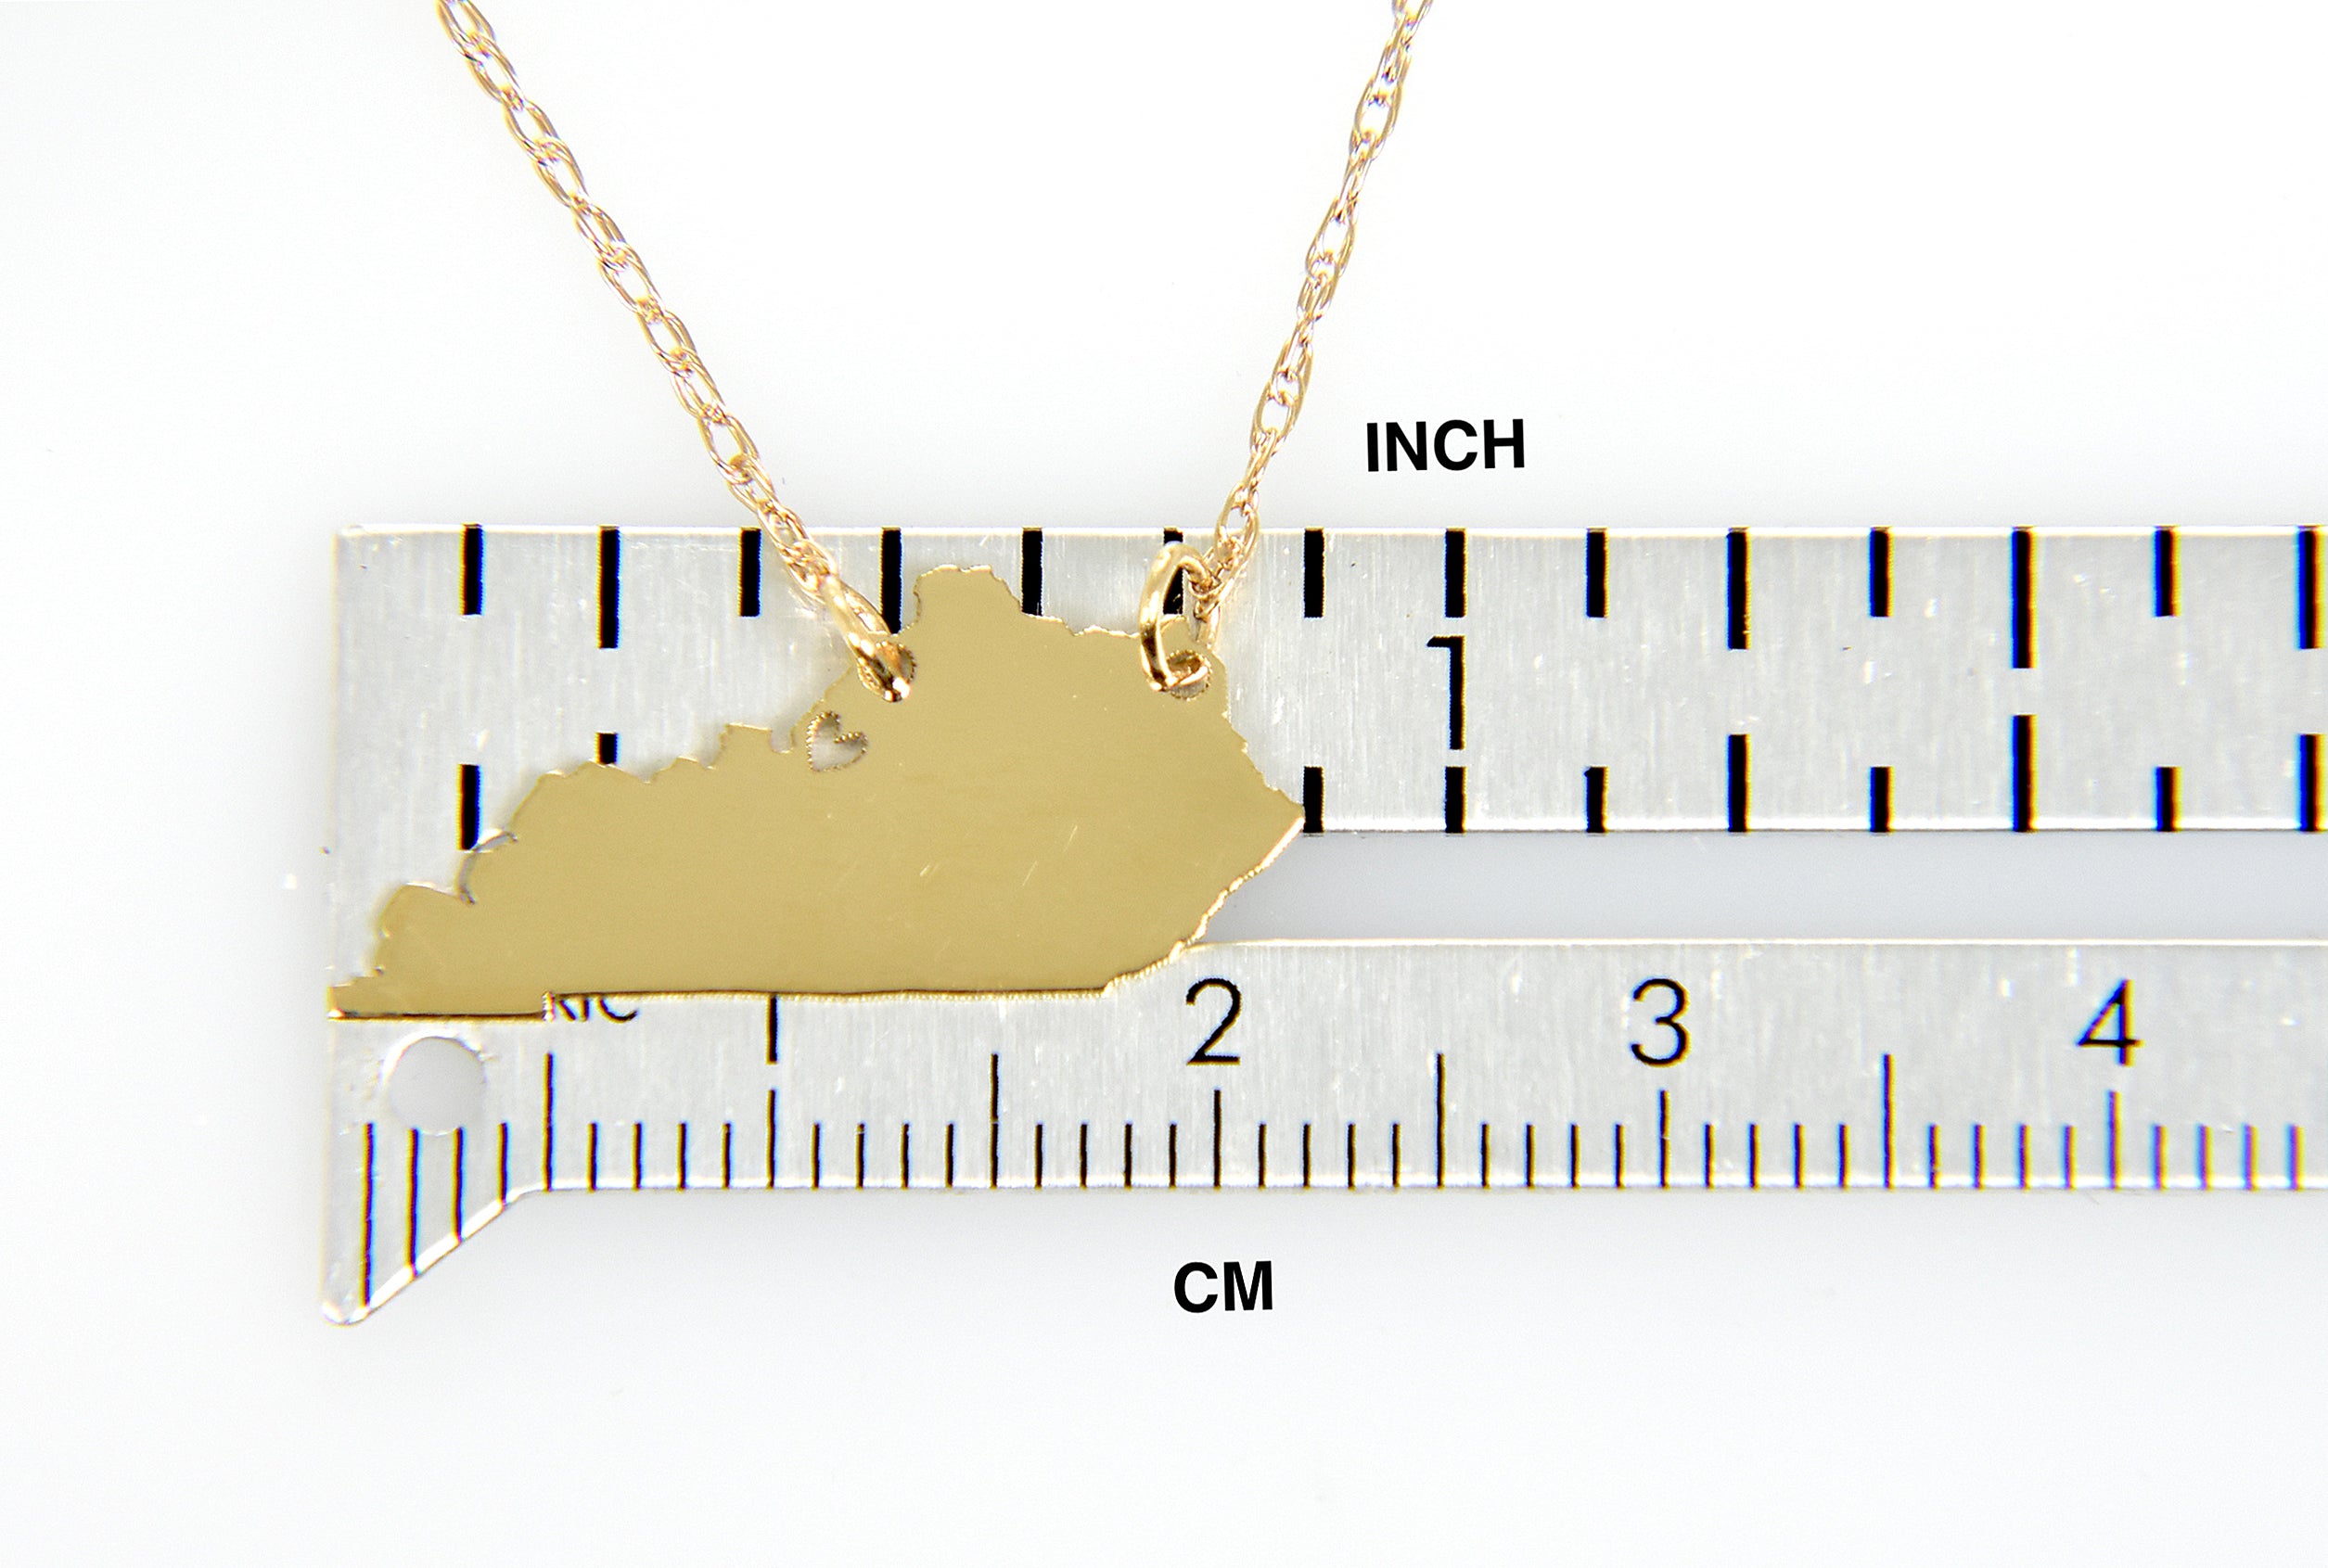 14k Gold 10k Gold Silver Kentucky State Heart Personalized City Necklace